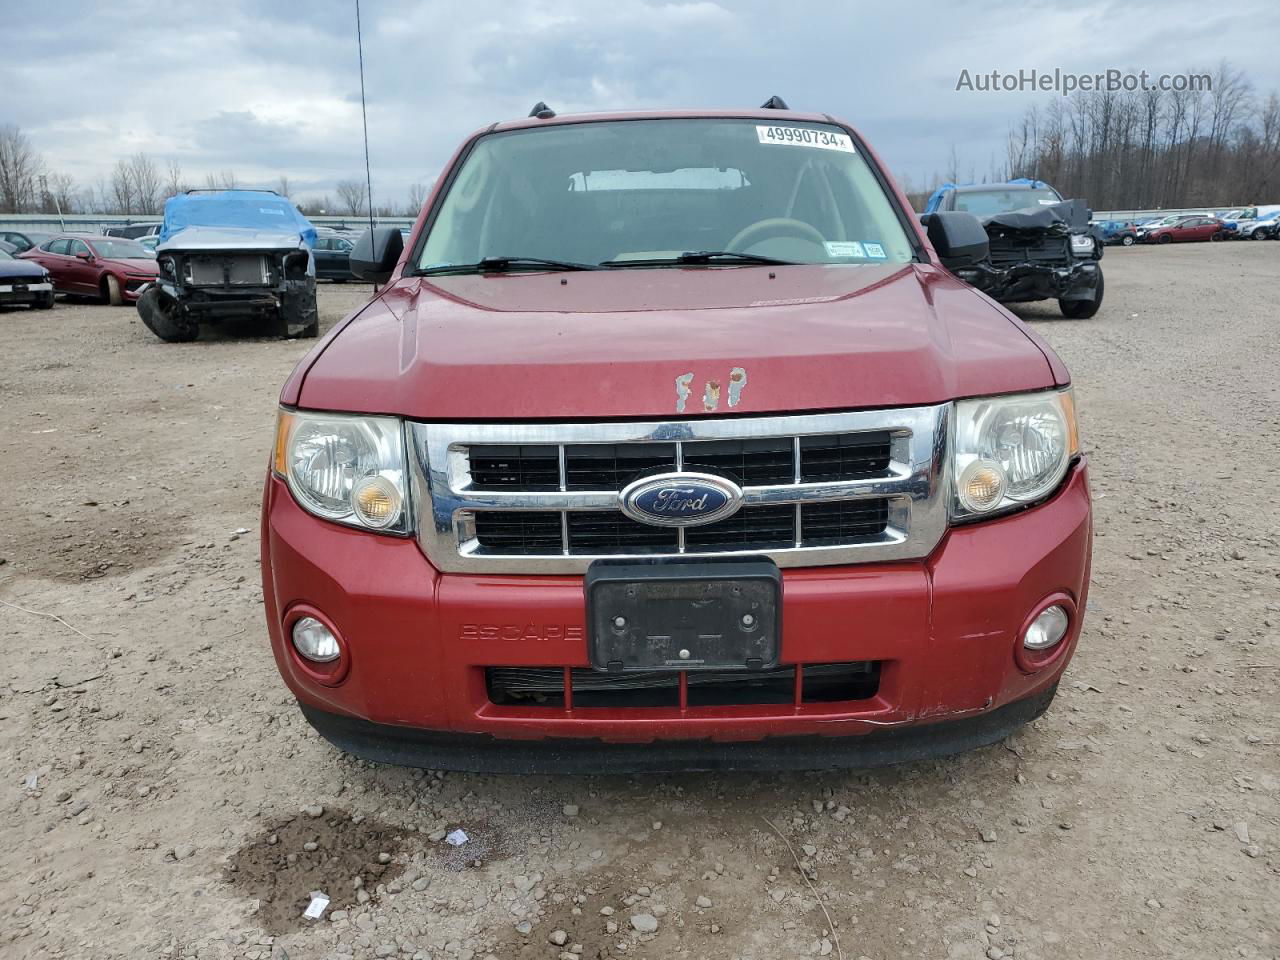 2009 Ford Escape Xlt Red vin: 1FMCU93799KD04181